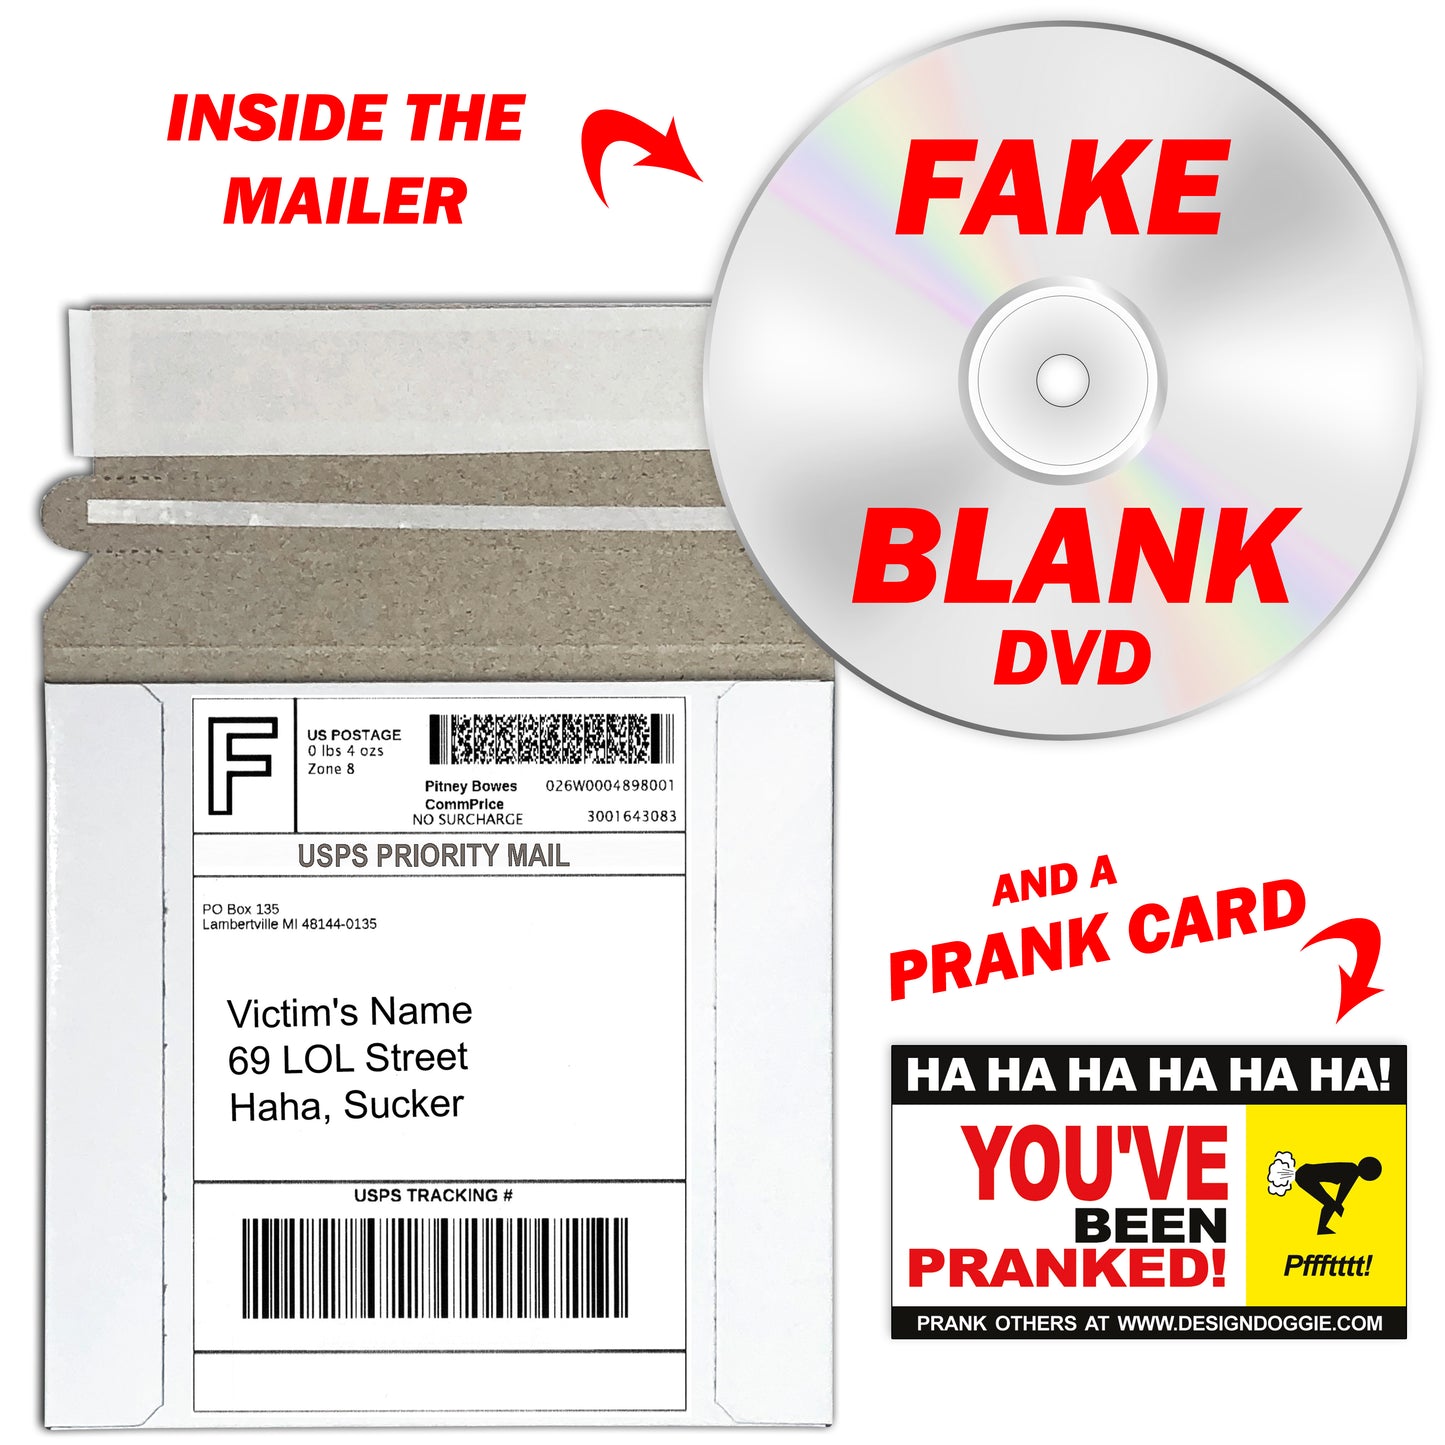 Bedroom Bloopers Fake DVD mail prank gets sent directly to your victims 100% anonymously!